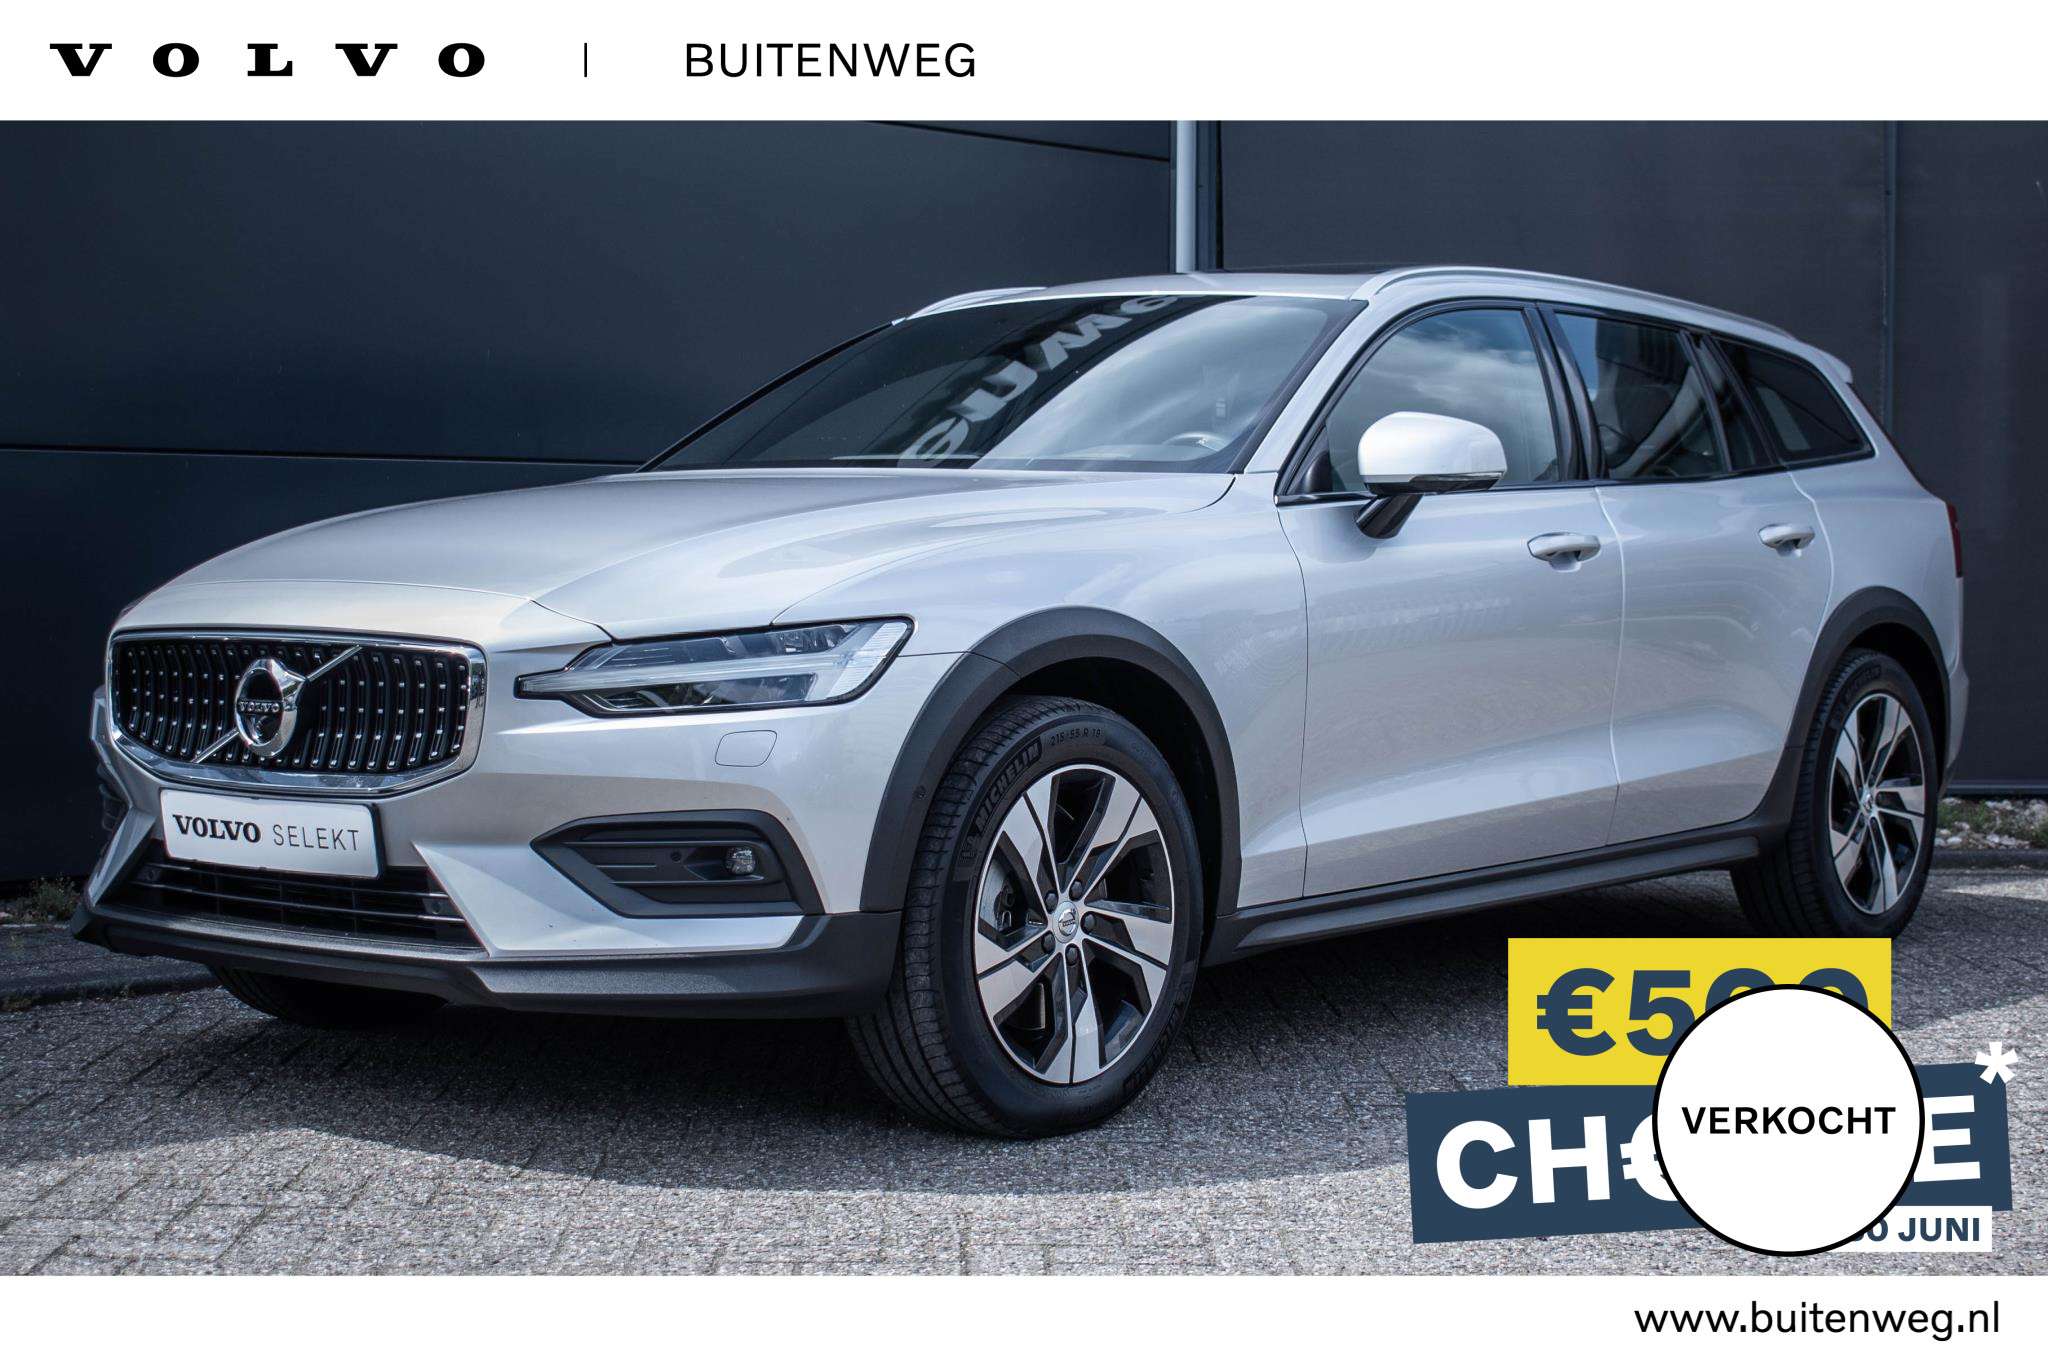 Volvo V60 Cross Country Station wagon in Grey used in HILVERSUM for € 34,890.-